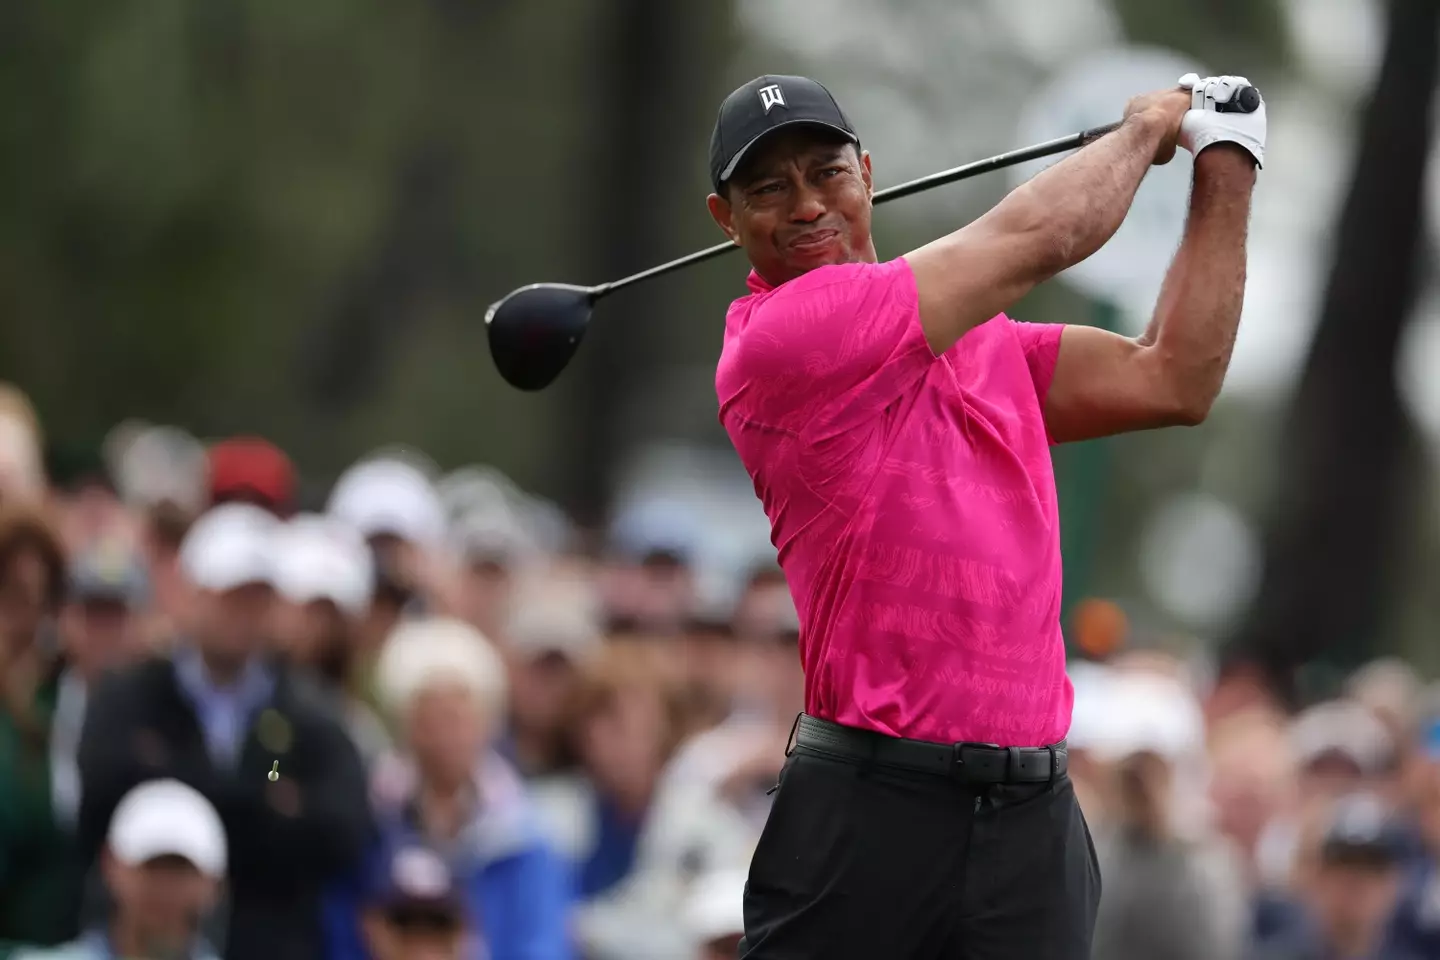 Woods has criticised other players who have joined LIV Golf.